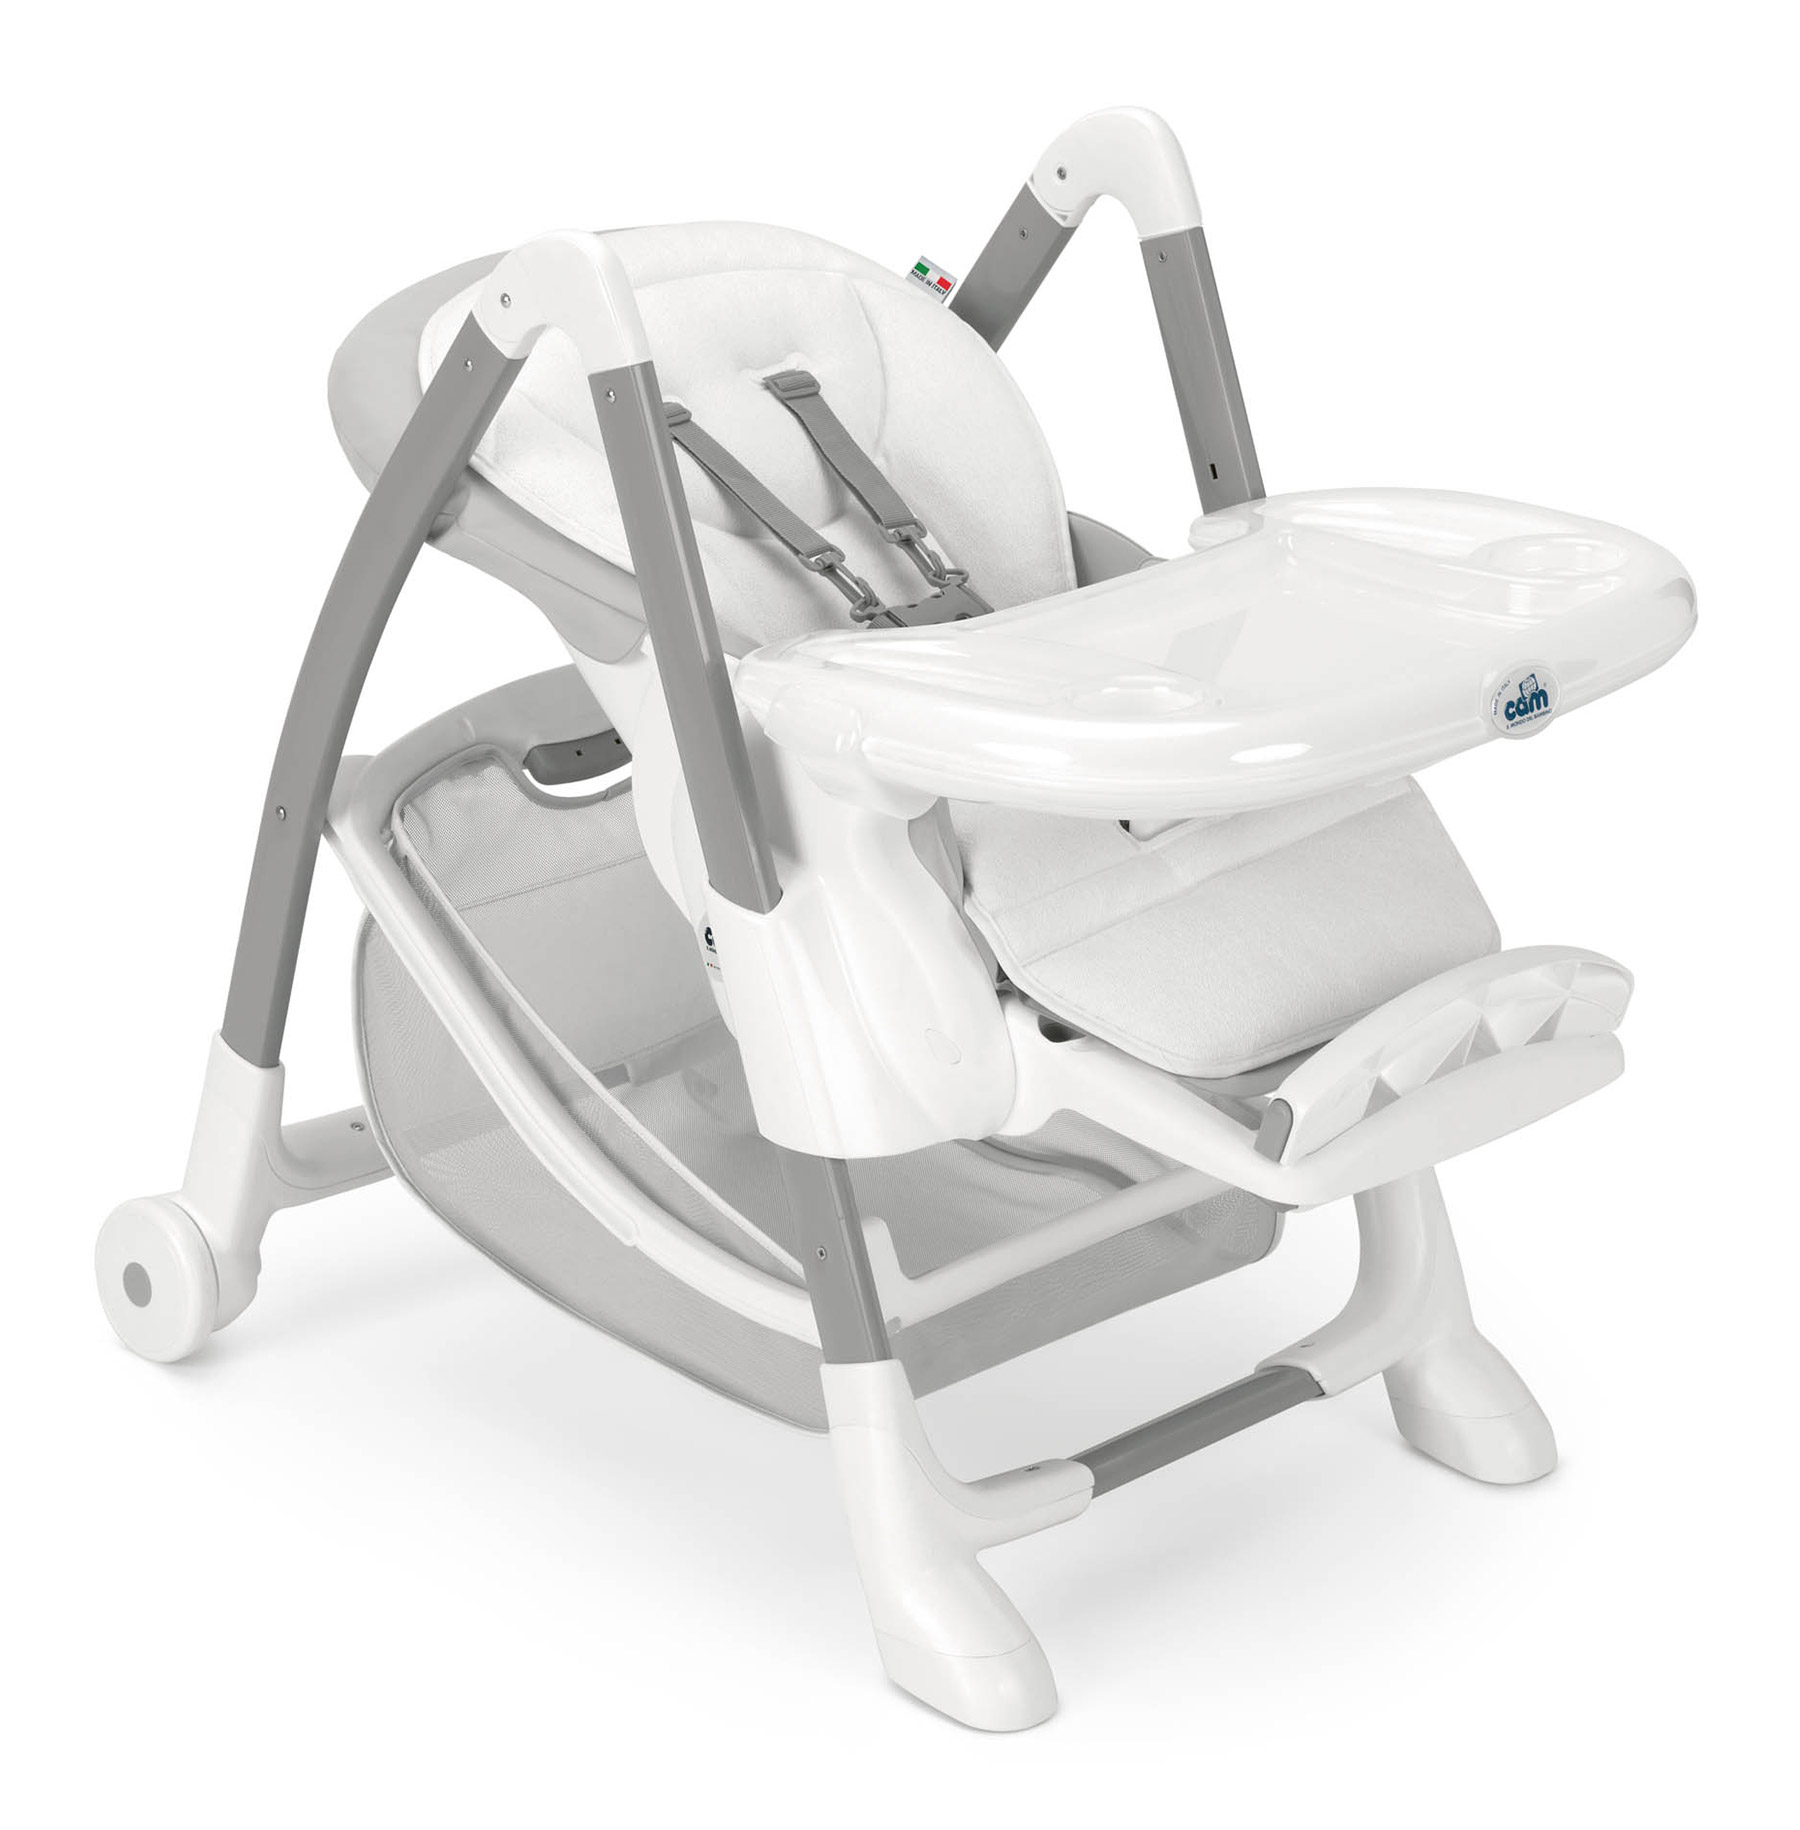 CAM Gusto Baby High Chair S2500 Series Best Price in UAE